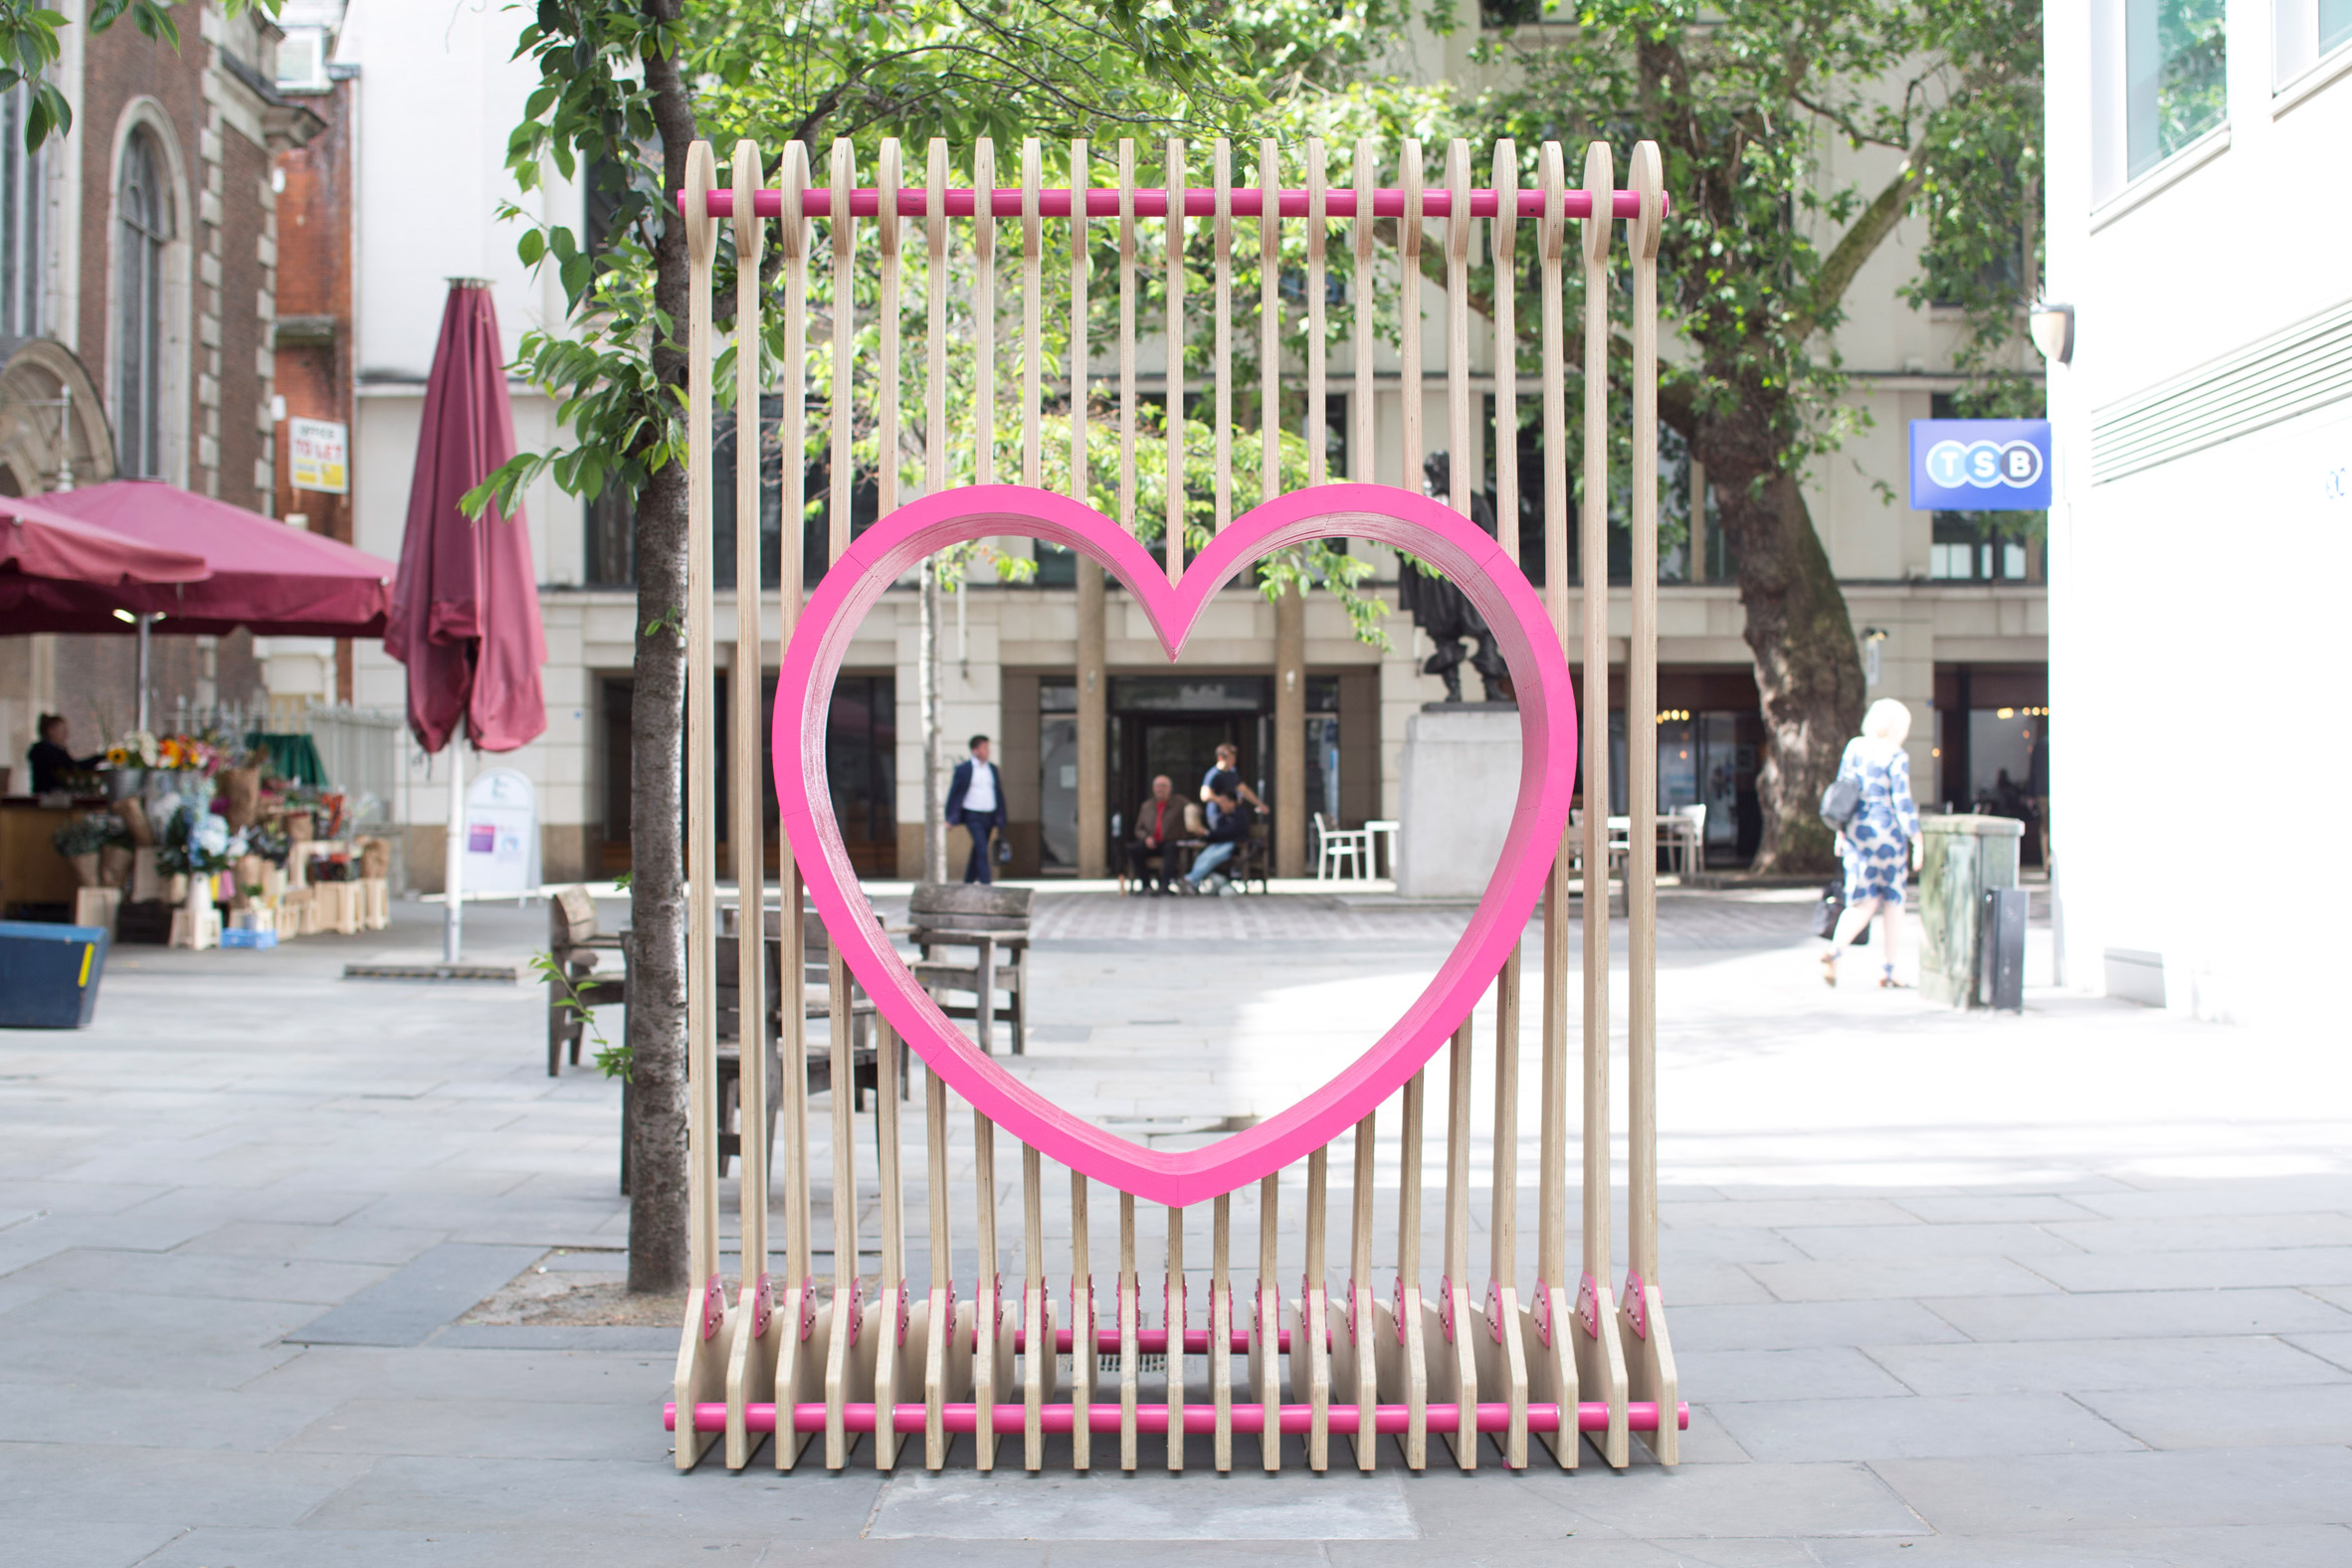 City Benches at London Festival of Architecture 